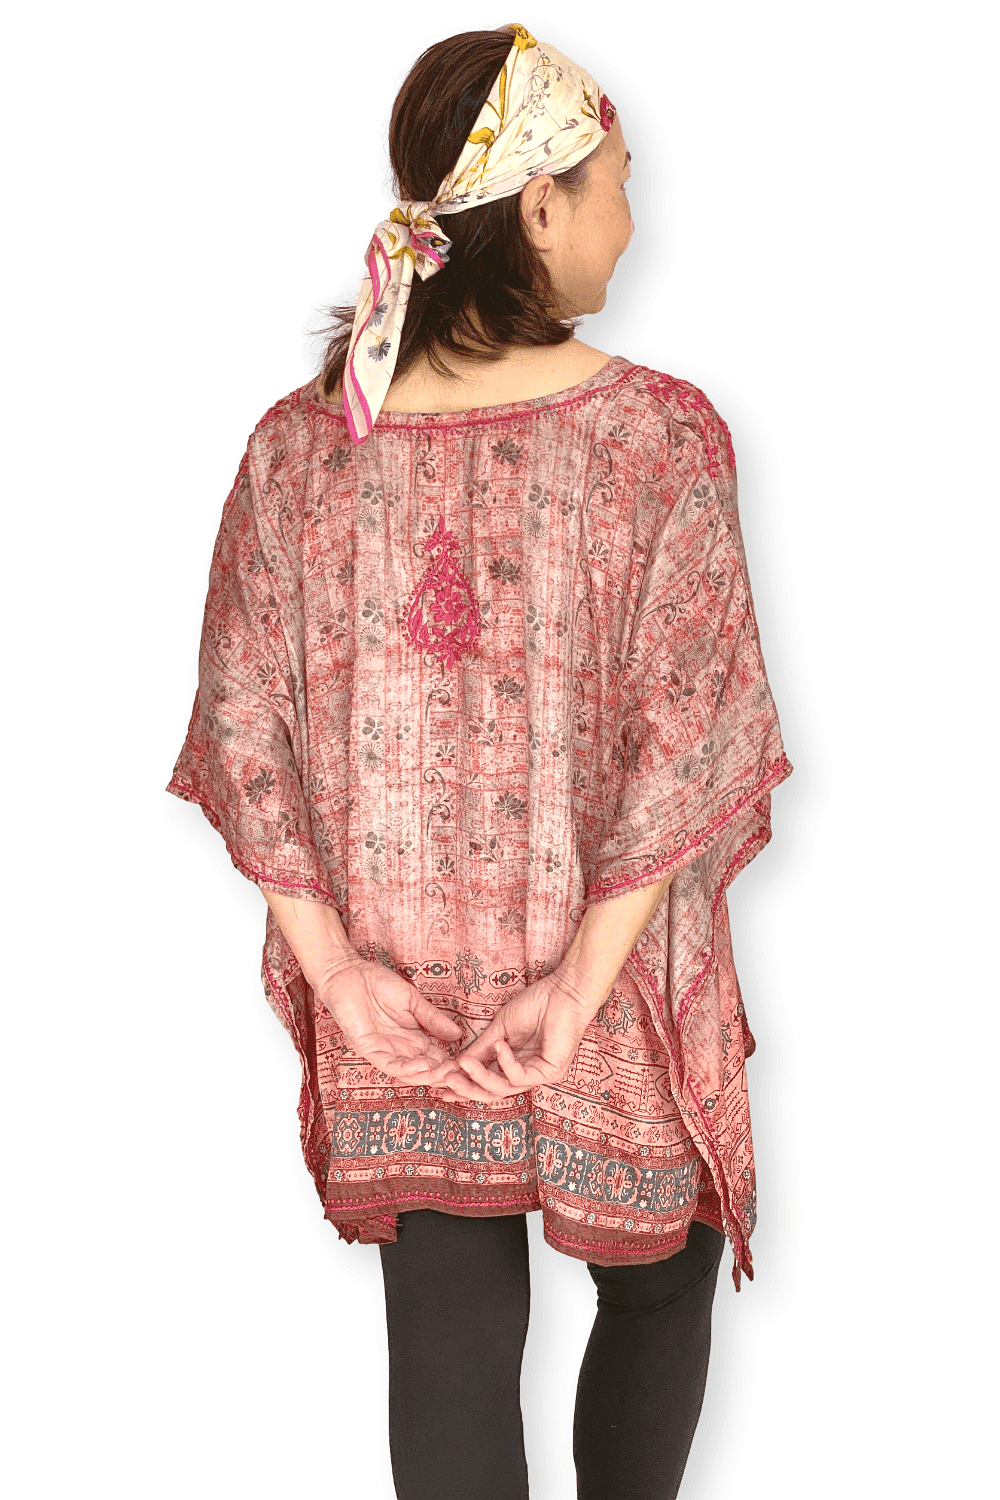 Embroidered Loose Fit Top - Marjory Warren Boutique